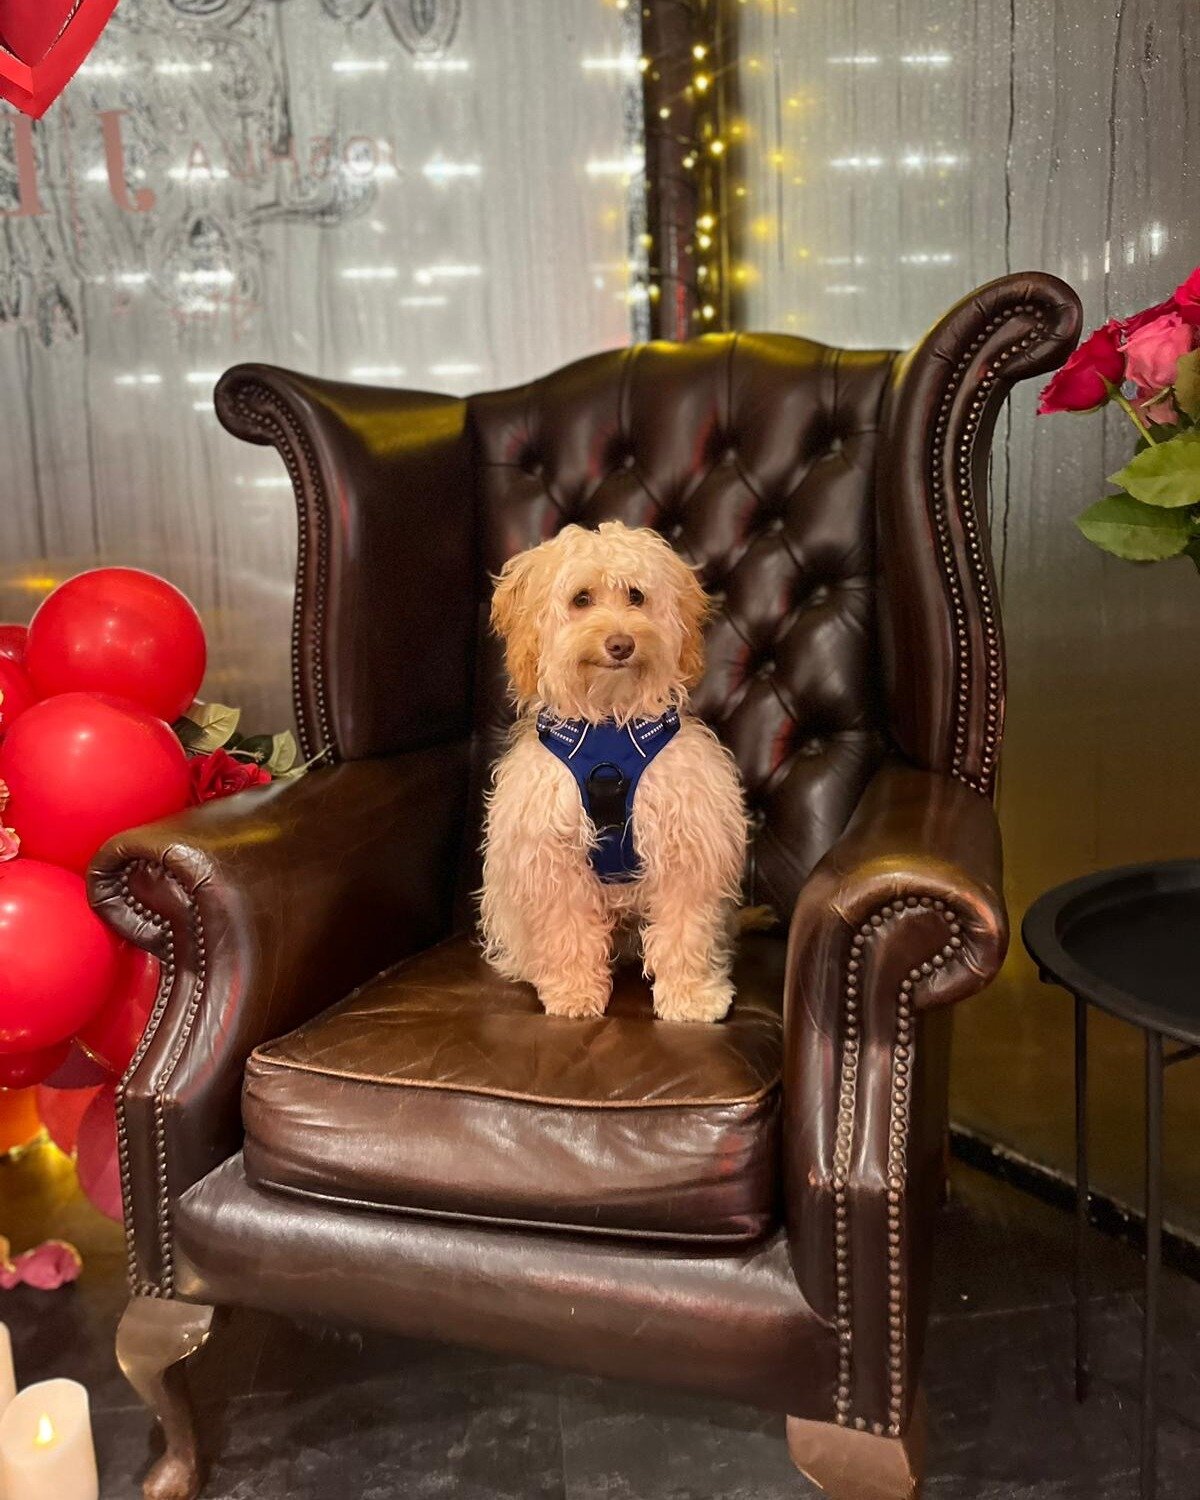 Today is #LoveYourPetDay 🐾❤️

...and there's definitely a special someone who has our salon's heart 🐶 our little furry man loves meeting and greeting you all on your visits 🫶

We understand that pawrent life can be hard to juggle sometimes and tha